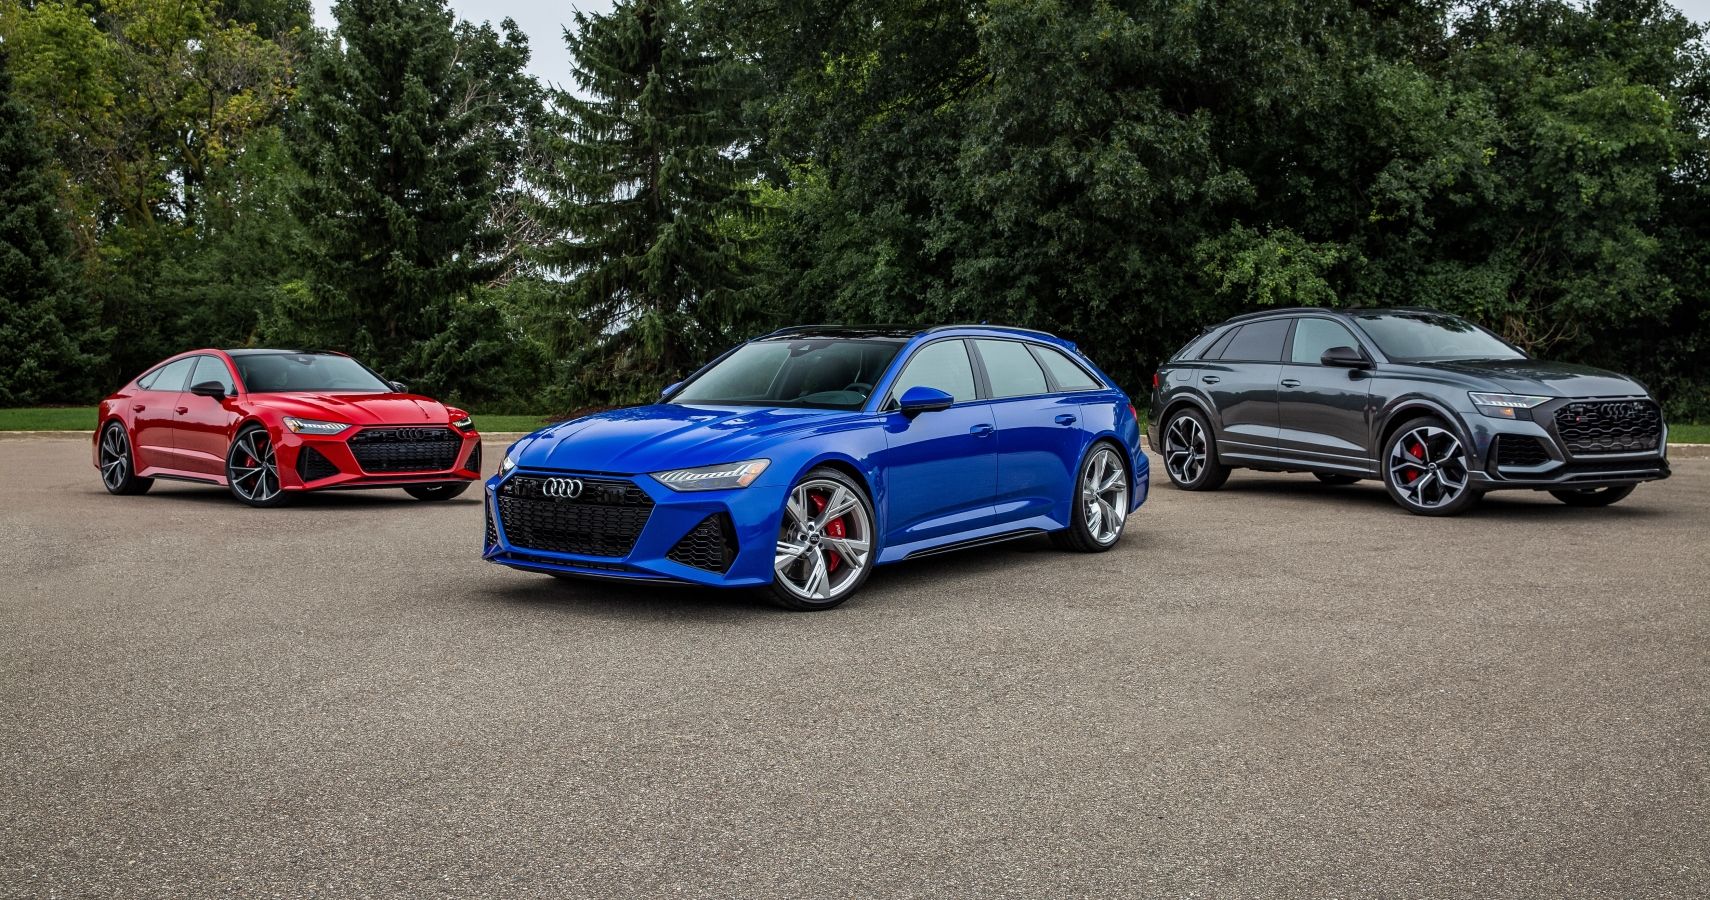 2021 Audi RS 7, RS 6 Avant and RS Q8